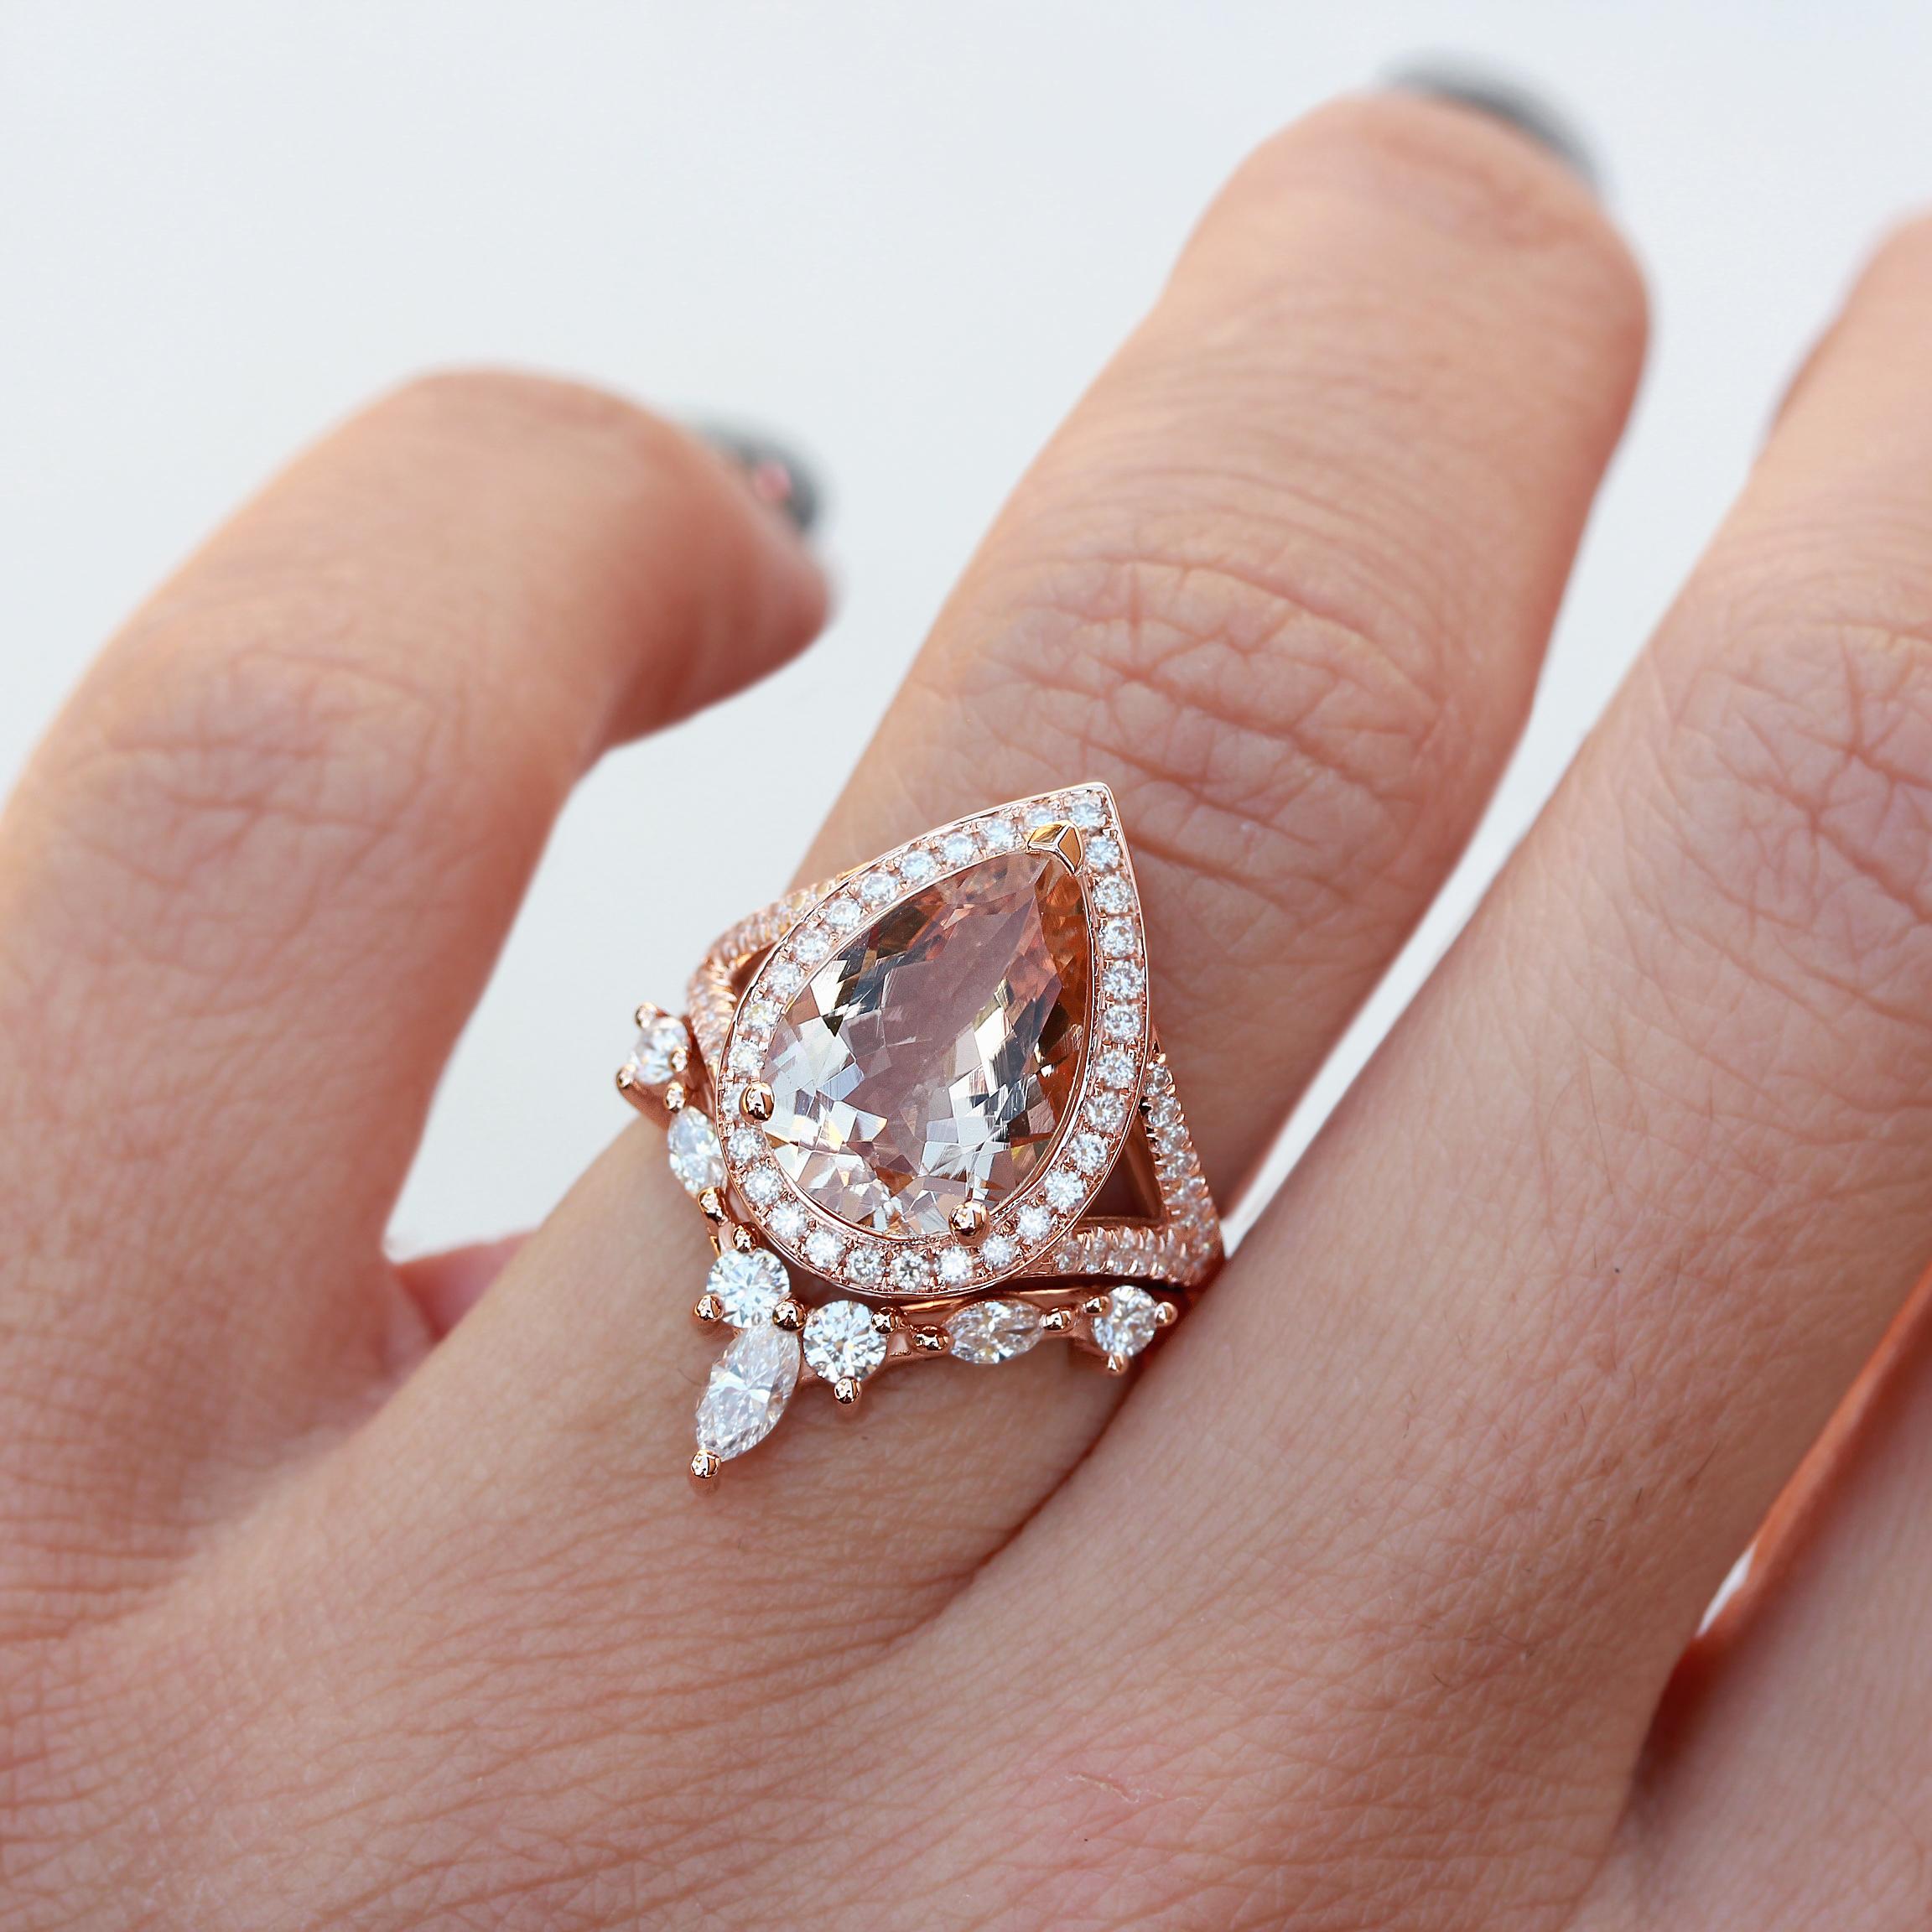 Beautiful pear-shaped 3.0ct morganite and diamonds two rings engagement set - Nia cocktail.
Perfect as a bridal ring set, cocktail ring, or statement ring.
The list is for a two ring set.
Handmade with care. 
An original design by Silly Shiny